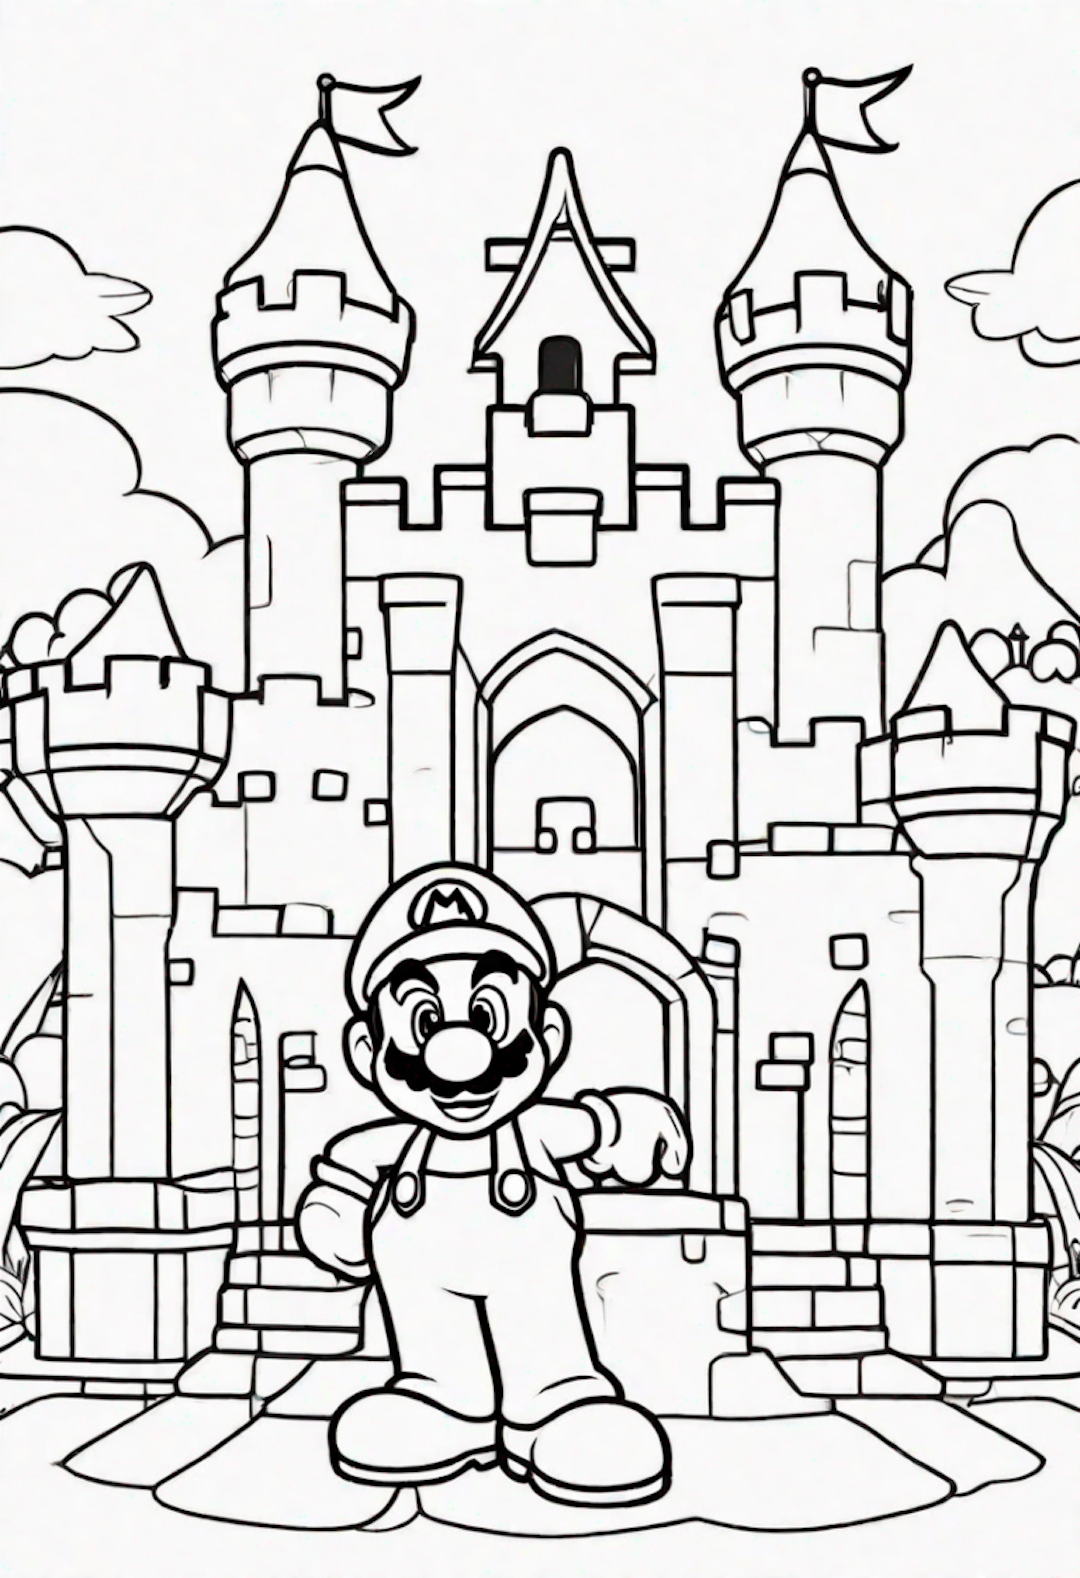 Mario at the Castle Coloring Page coloring pages